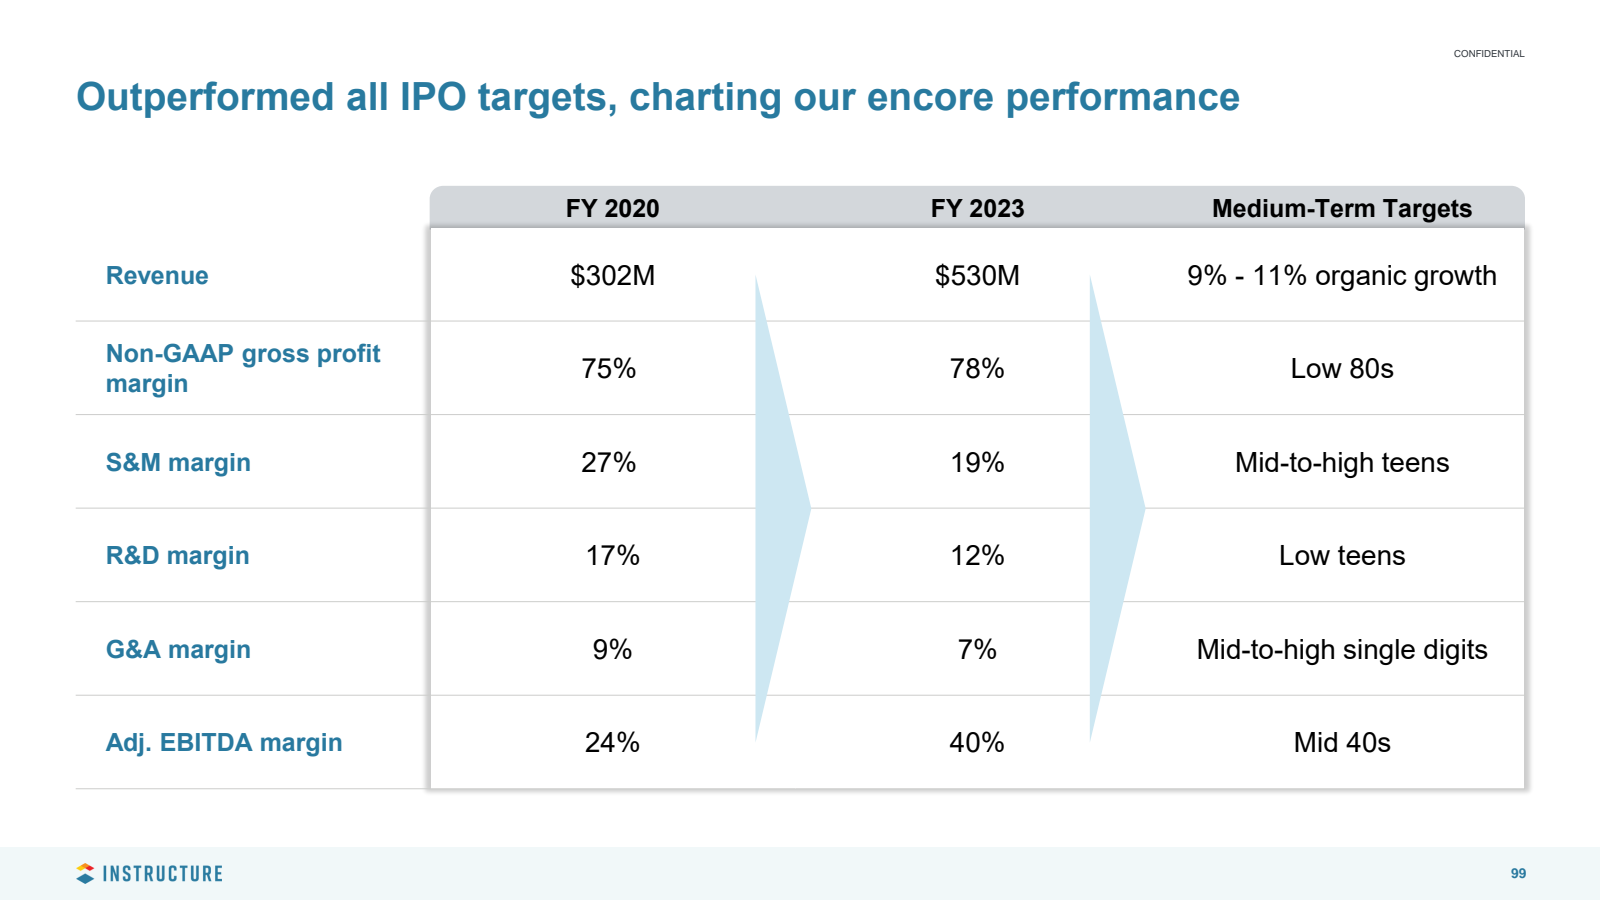 Outperformed all IPO